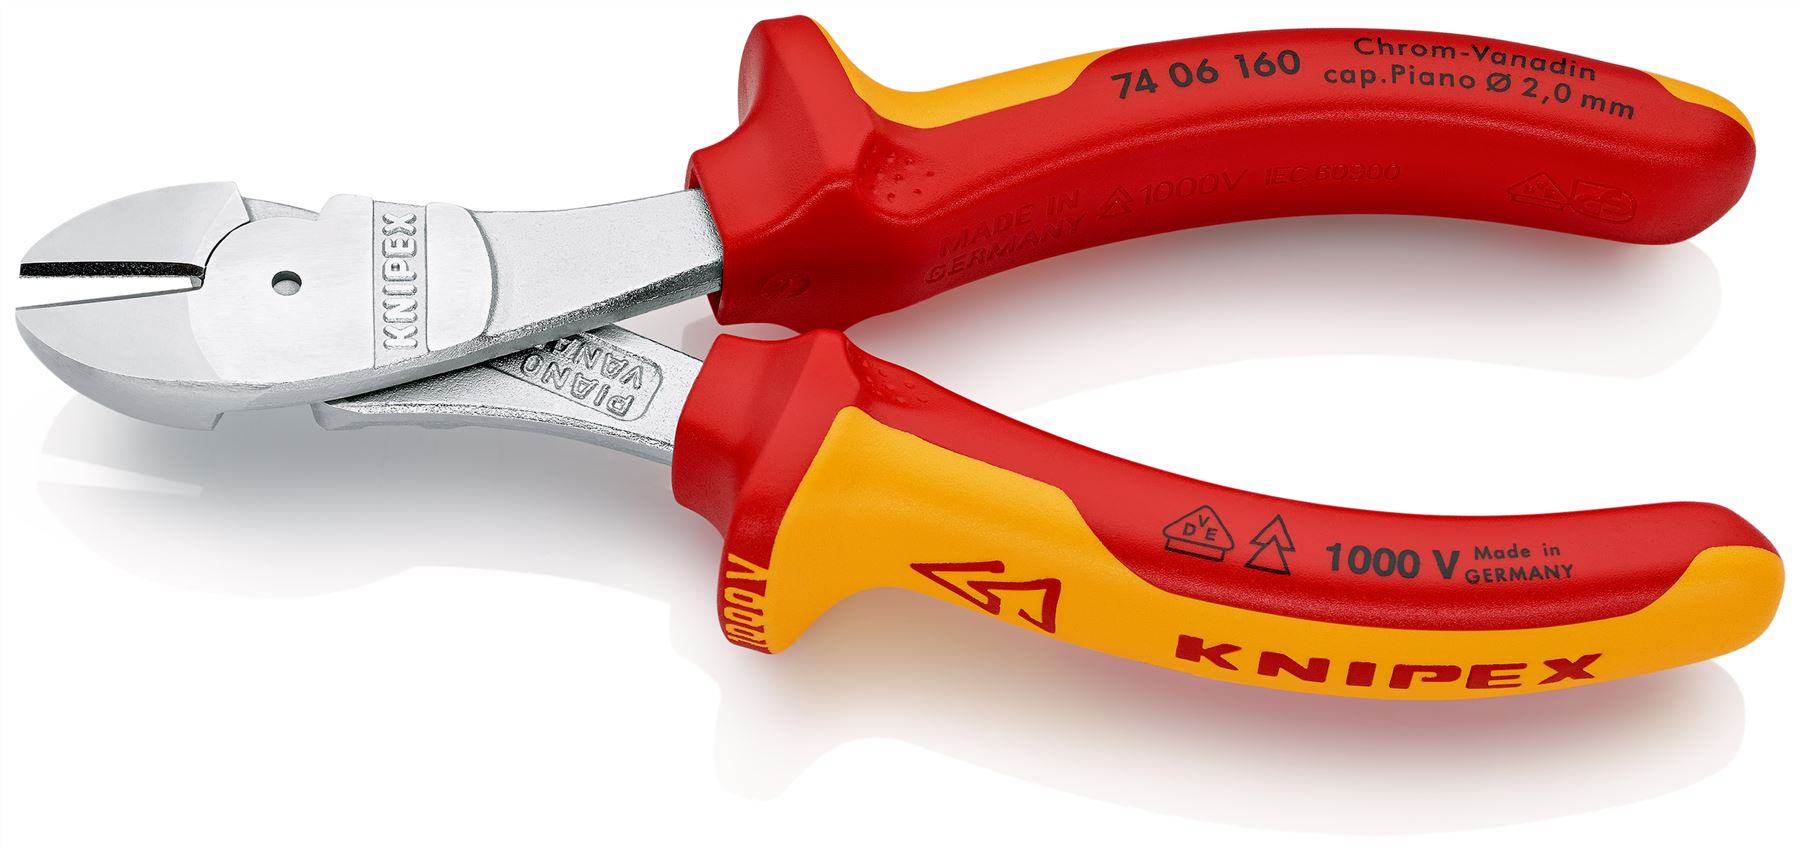 KNIPEX Diagonal Cutting Pliers High Leverage Side Cutters 160mm VDE Multi Component Grips 74 06 160